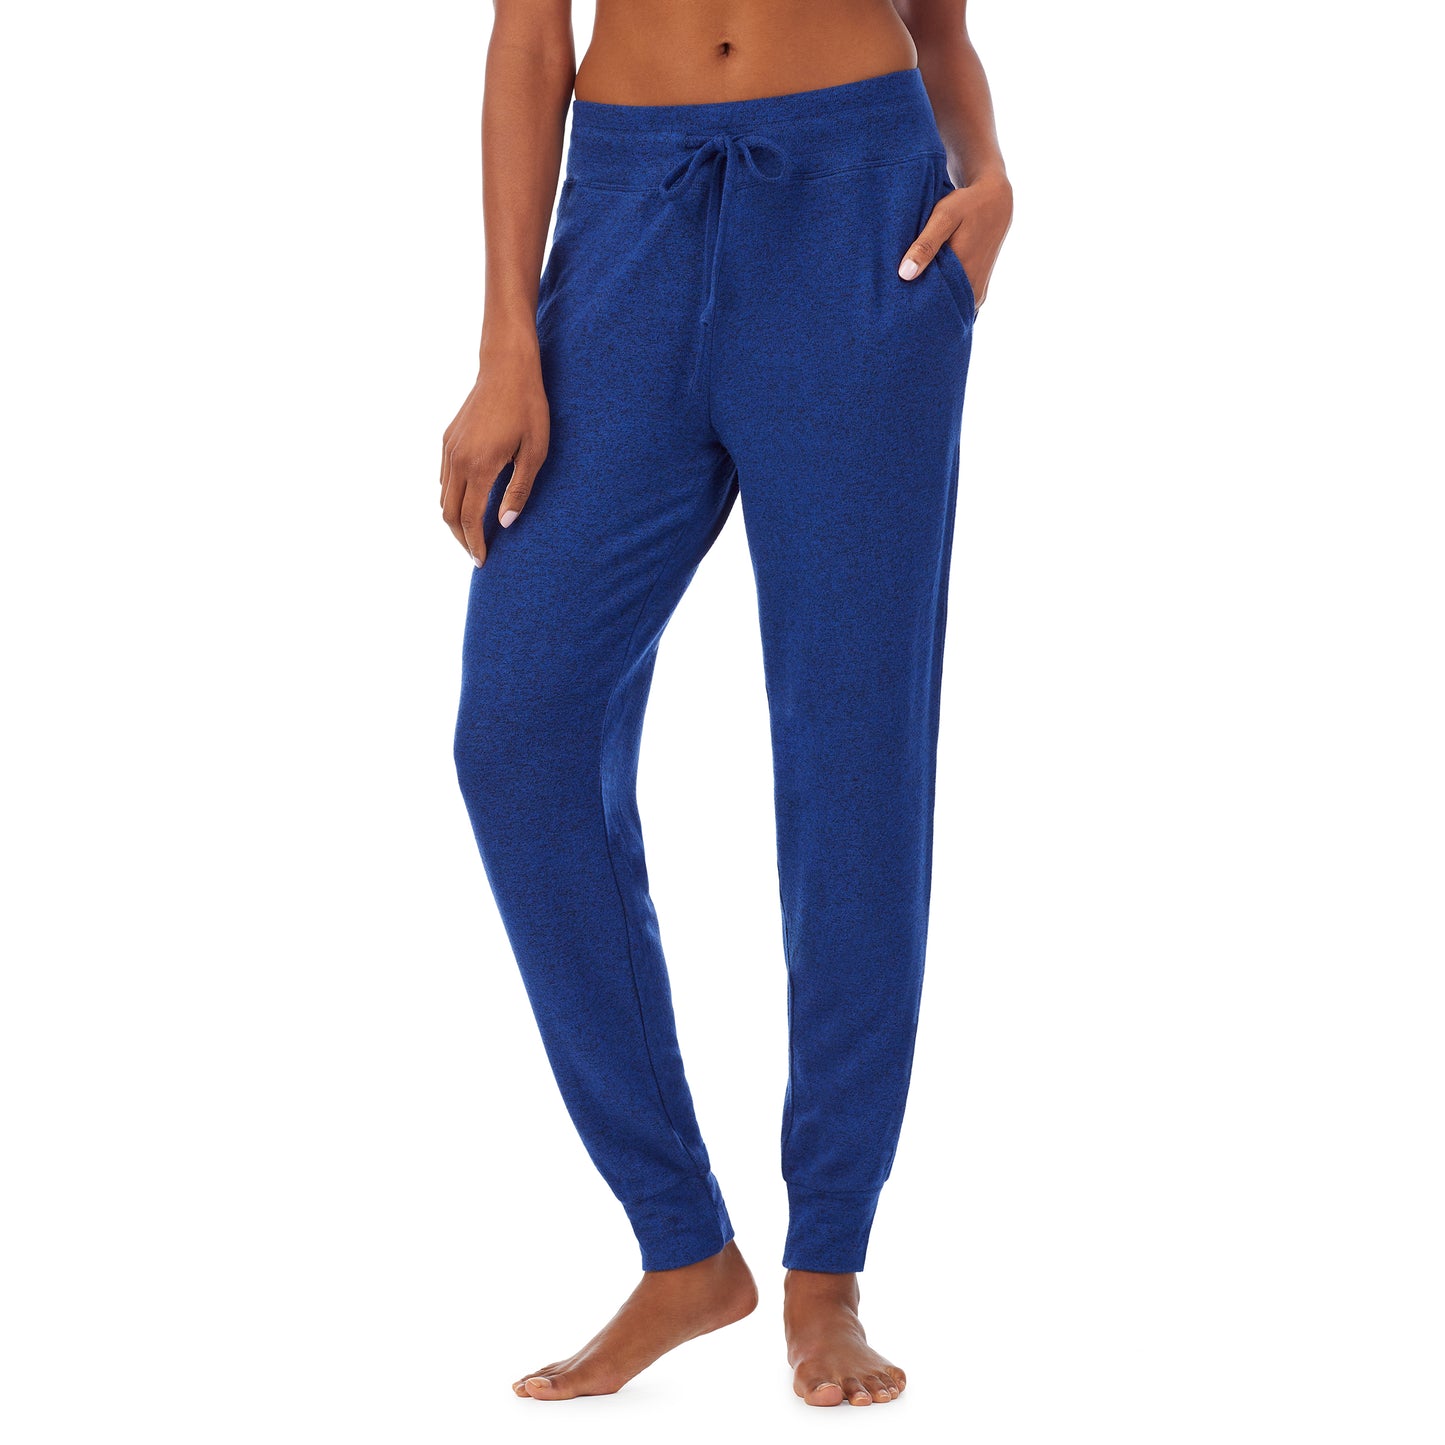 Marled Royal Blue; Model is wearing size S. She is 5’9”, Bust 32”, Waist 25.5”, Hips 36”.@lower body of a lady wearing blue jogger